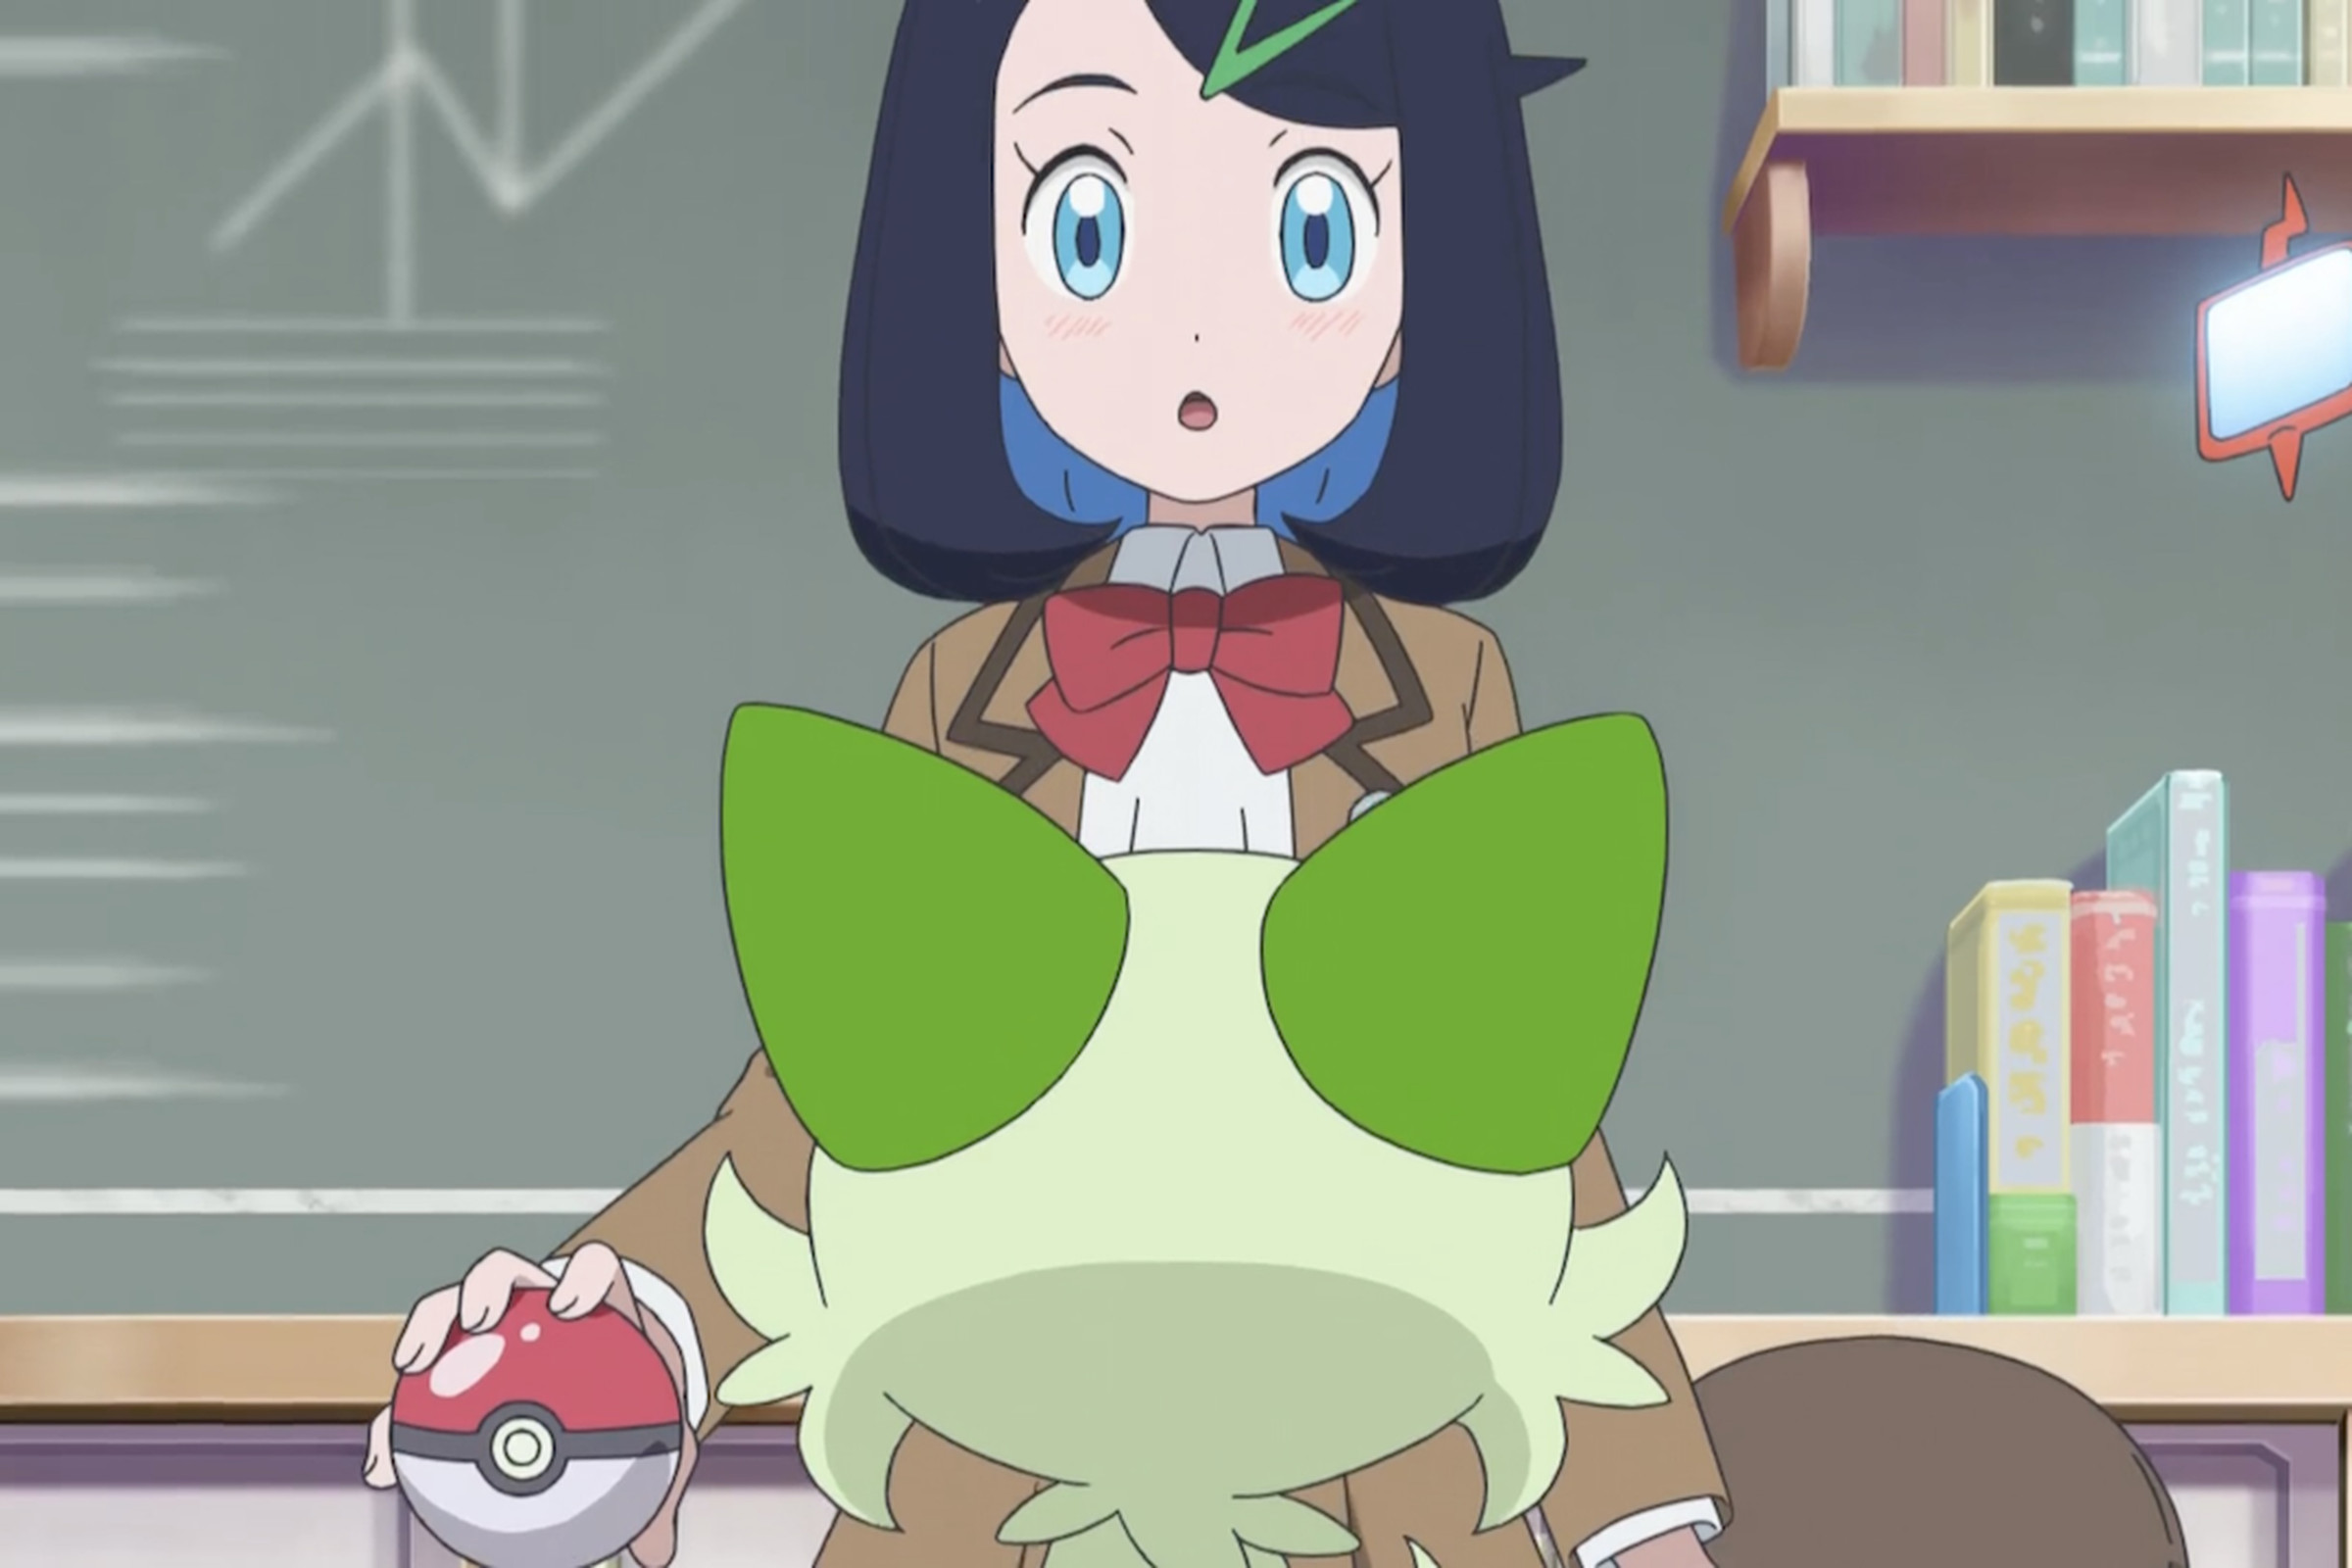 A girl in a brown Japanese school uniform looking down at a green cat that’s facing her.